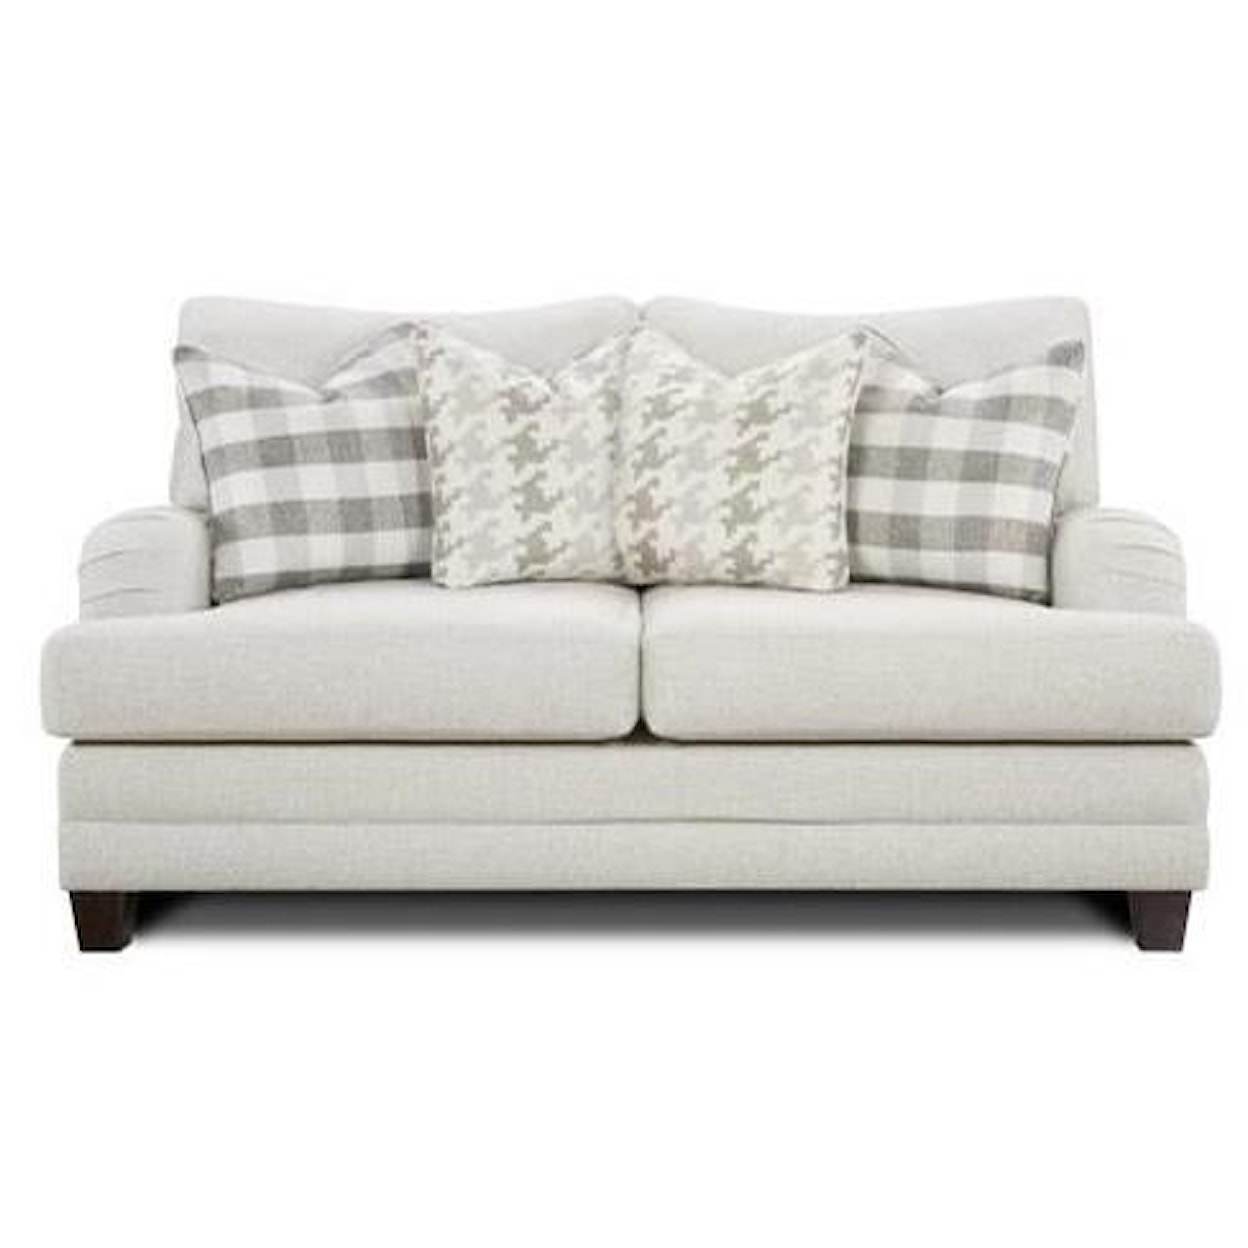 Fusion Furniture 4480-KP BASIC WOOL (REVOLUTION) Stationary Living Room Group